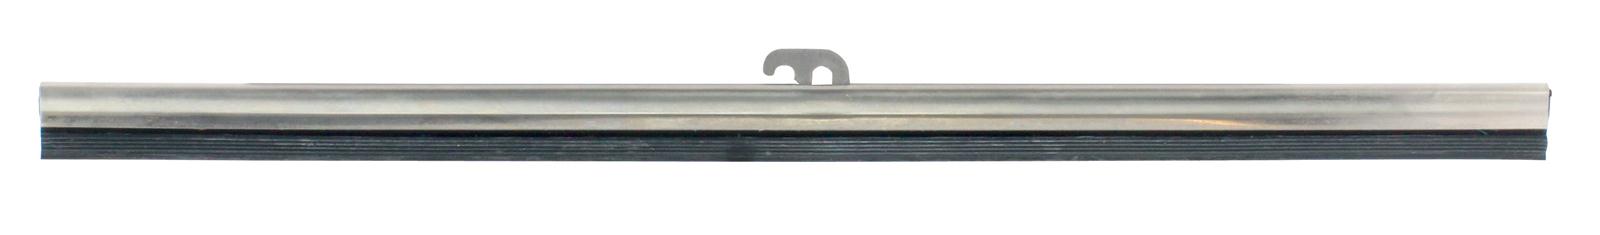 United Pacific A7027 10 Stainless Wiper Blade 